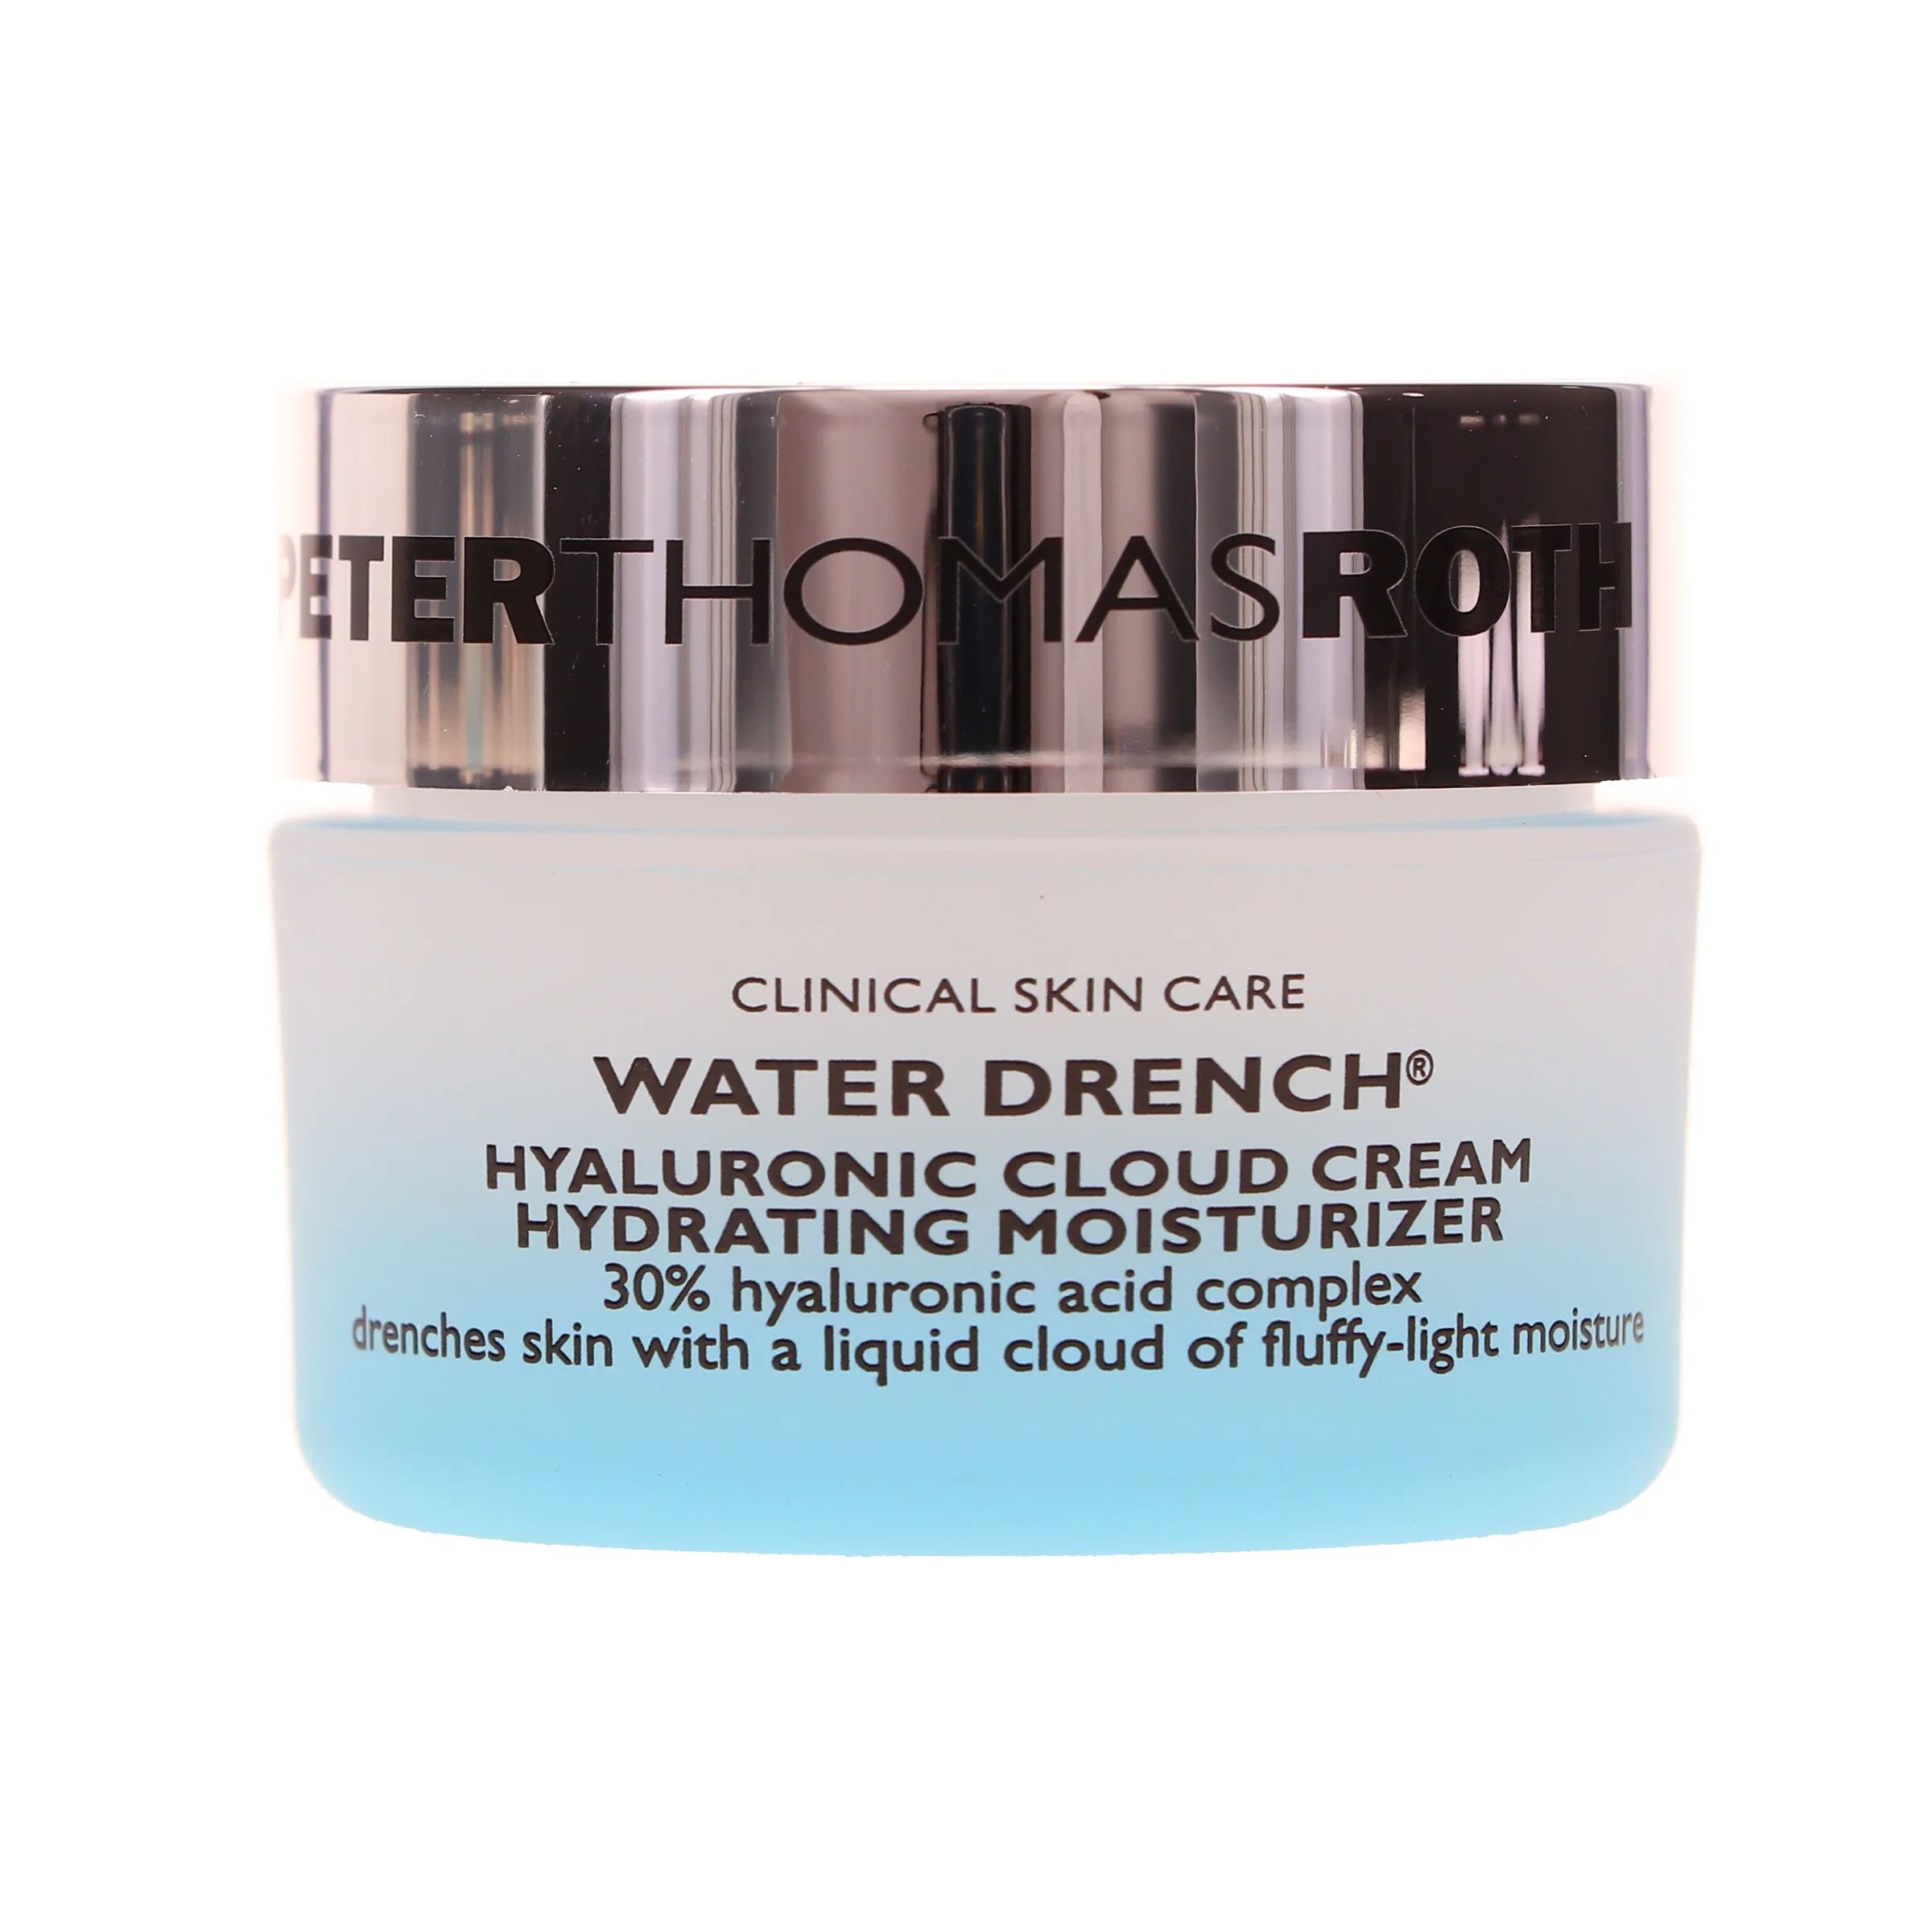 Peter Thomas Roth Water Drench Hyaluronic Cloud Cream Hydrating Moisturizer 0.67 oz | Walmart (US)